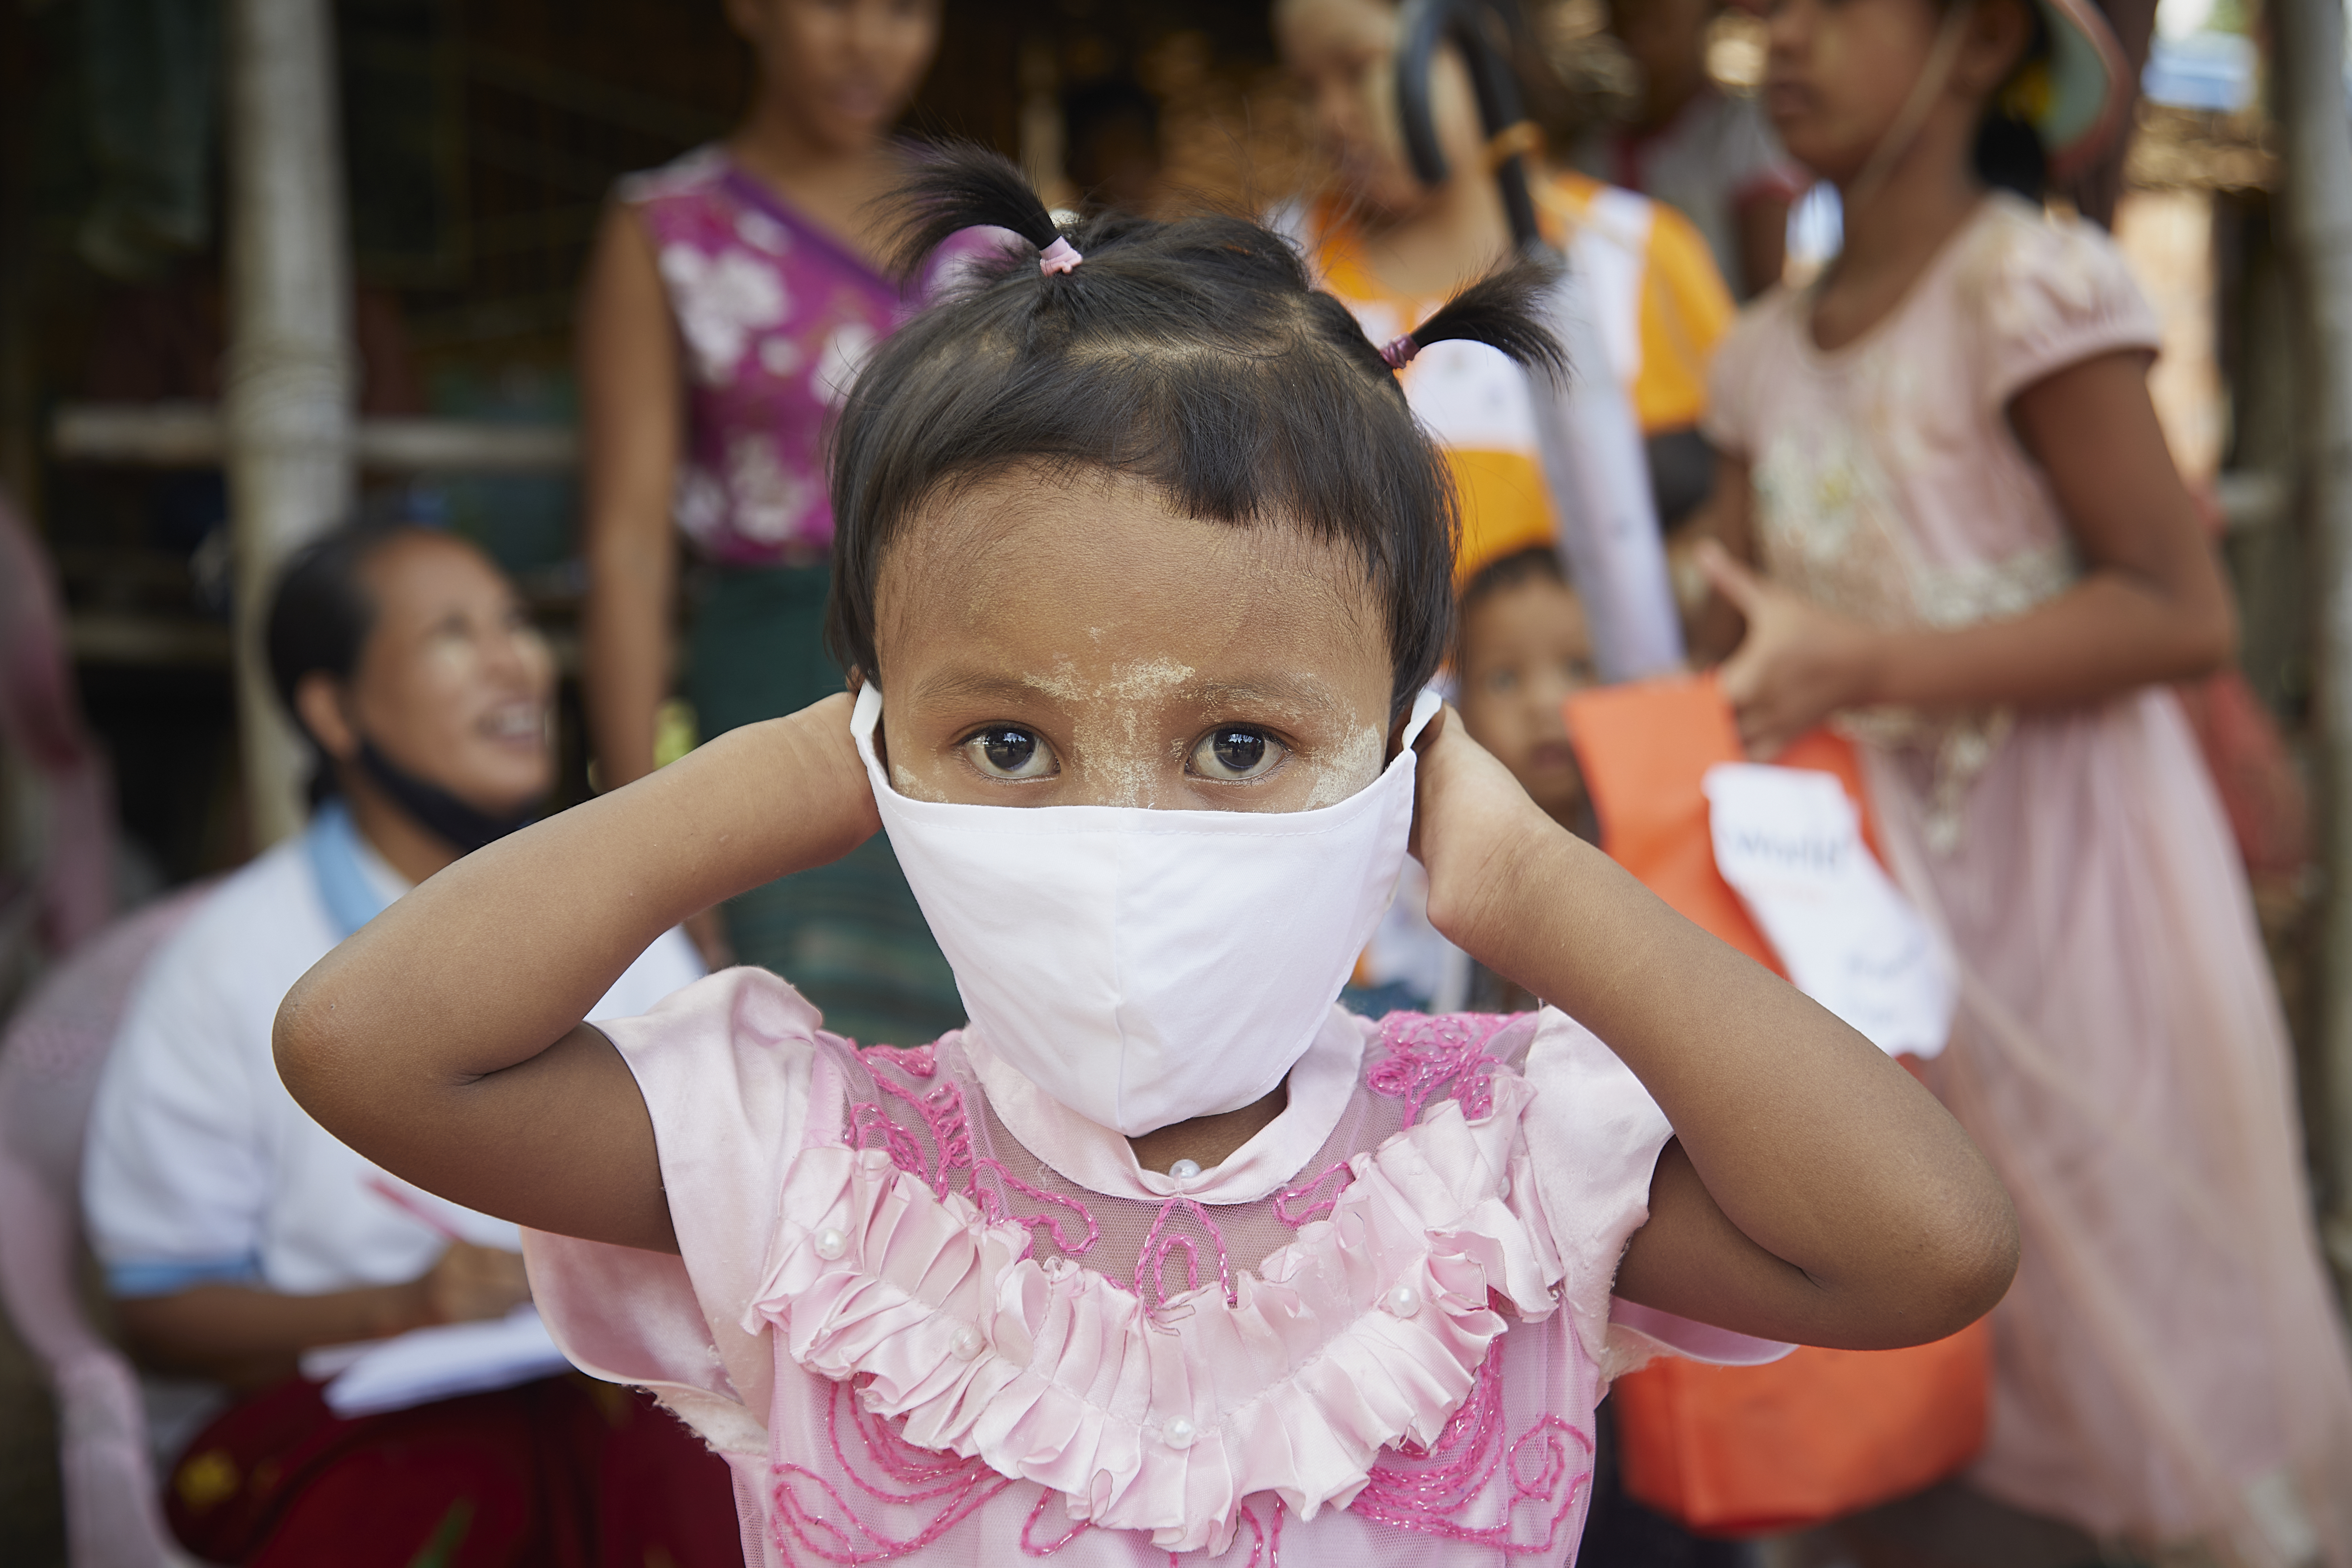 Girl in Myanmar puts a mask on her face as she stands, wearing pink, in front of a group of people